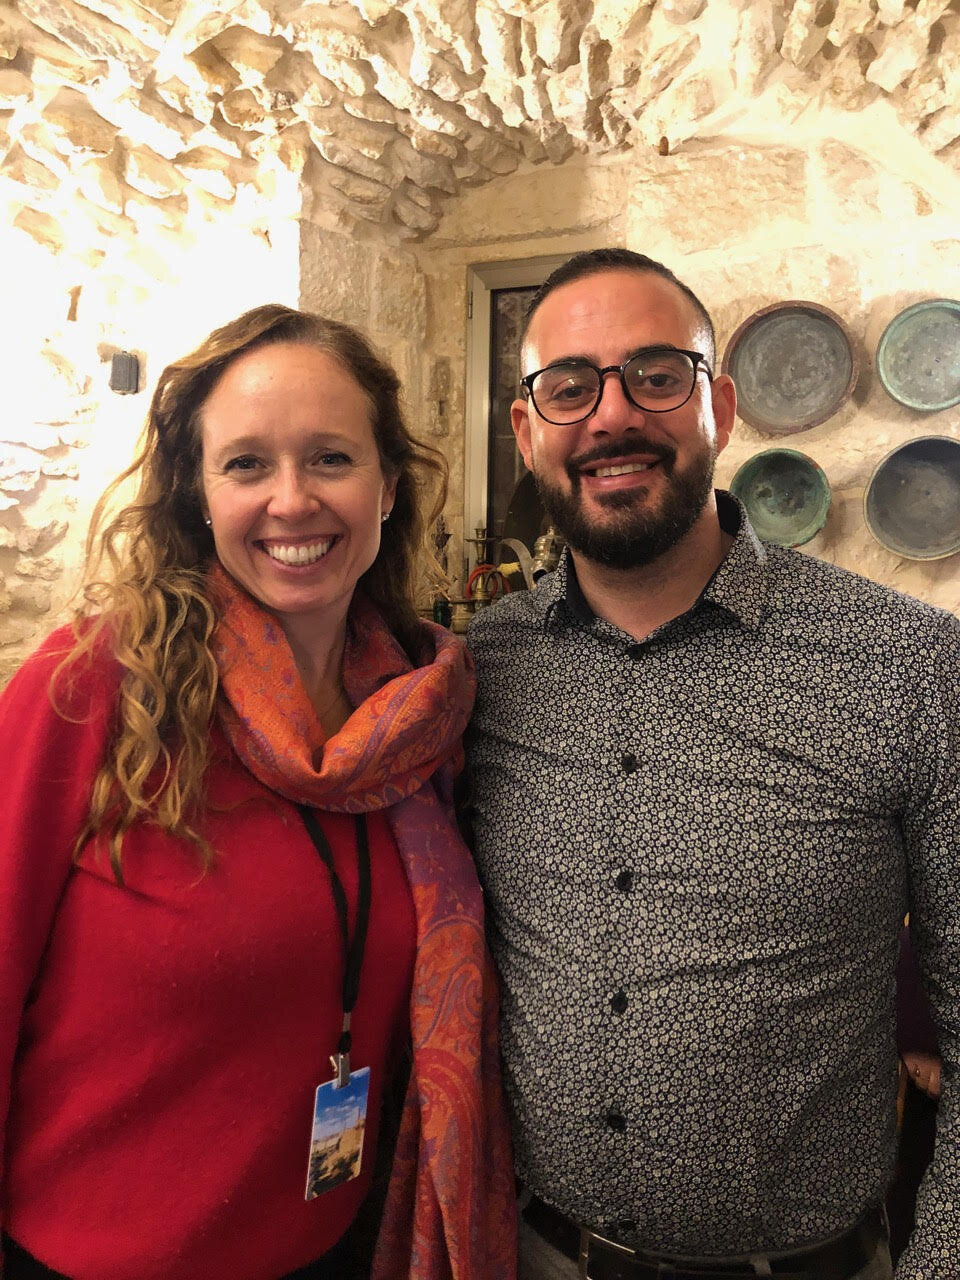   Elias D’eis,  a Palestinian Christian from Bethlehem, is the Executive Director of Holy Land Trust. Elias has a soft smile and a gentle, almost shy, demeanor, the kind of person you could never imagine being angry. As a Palestinian, Elias’s formati